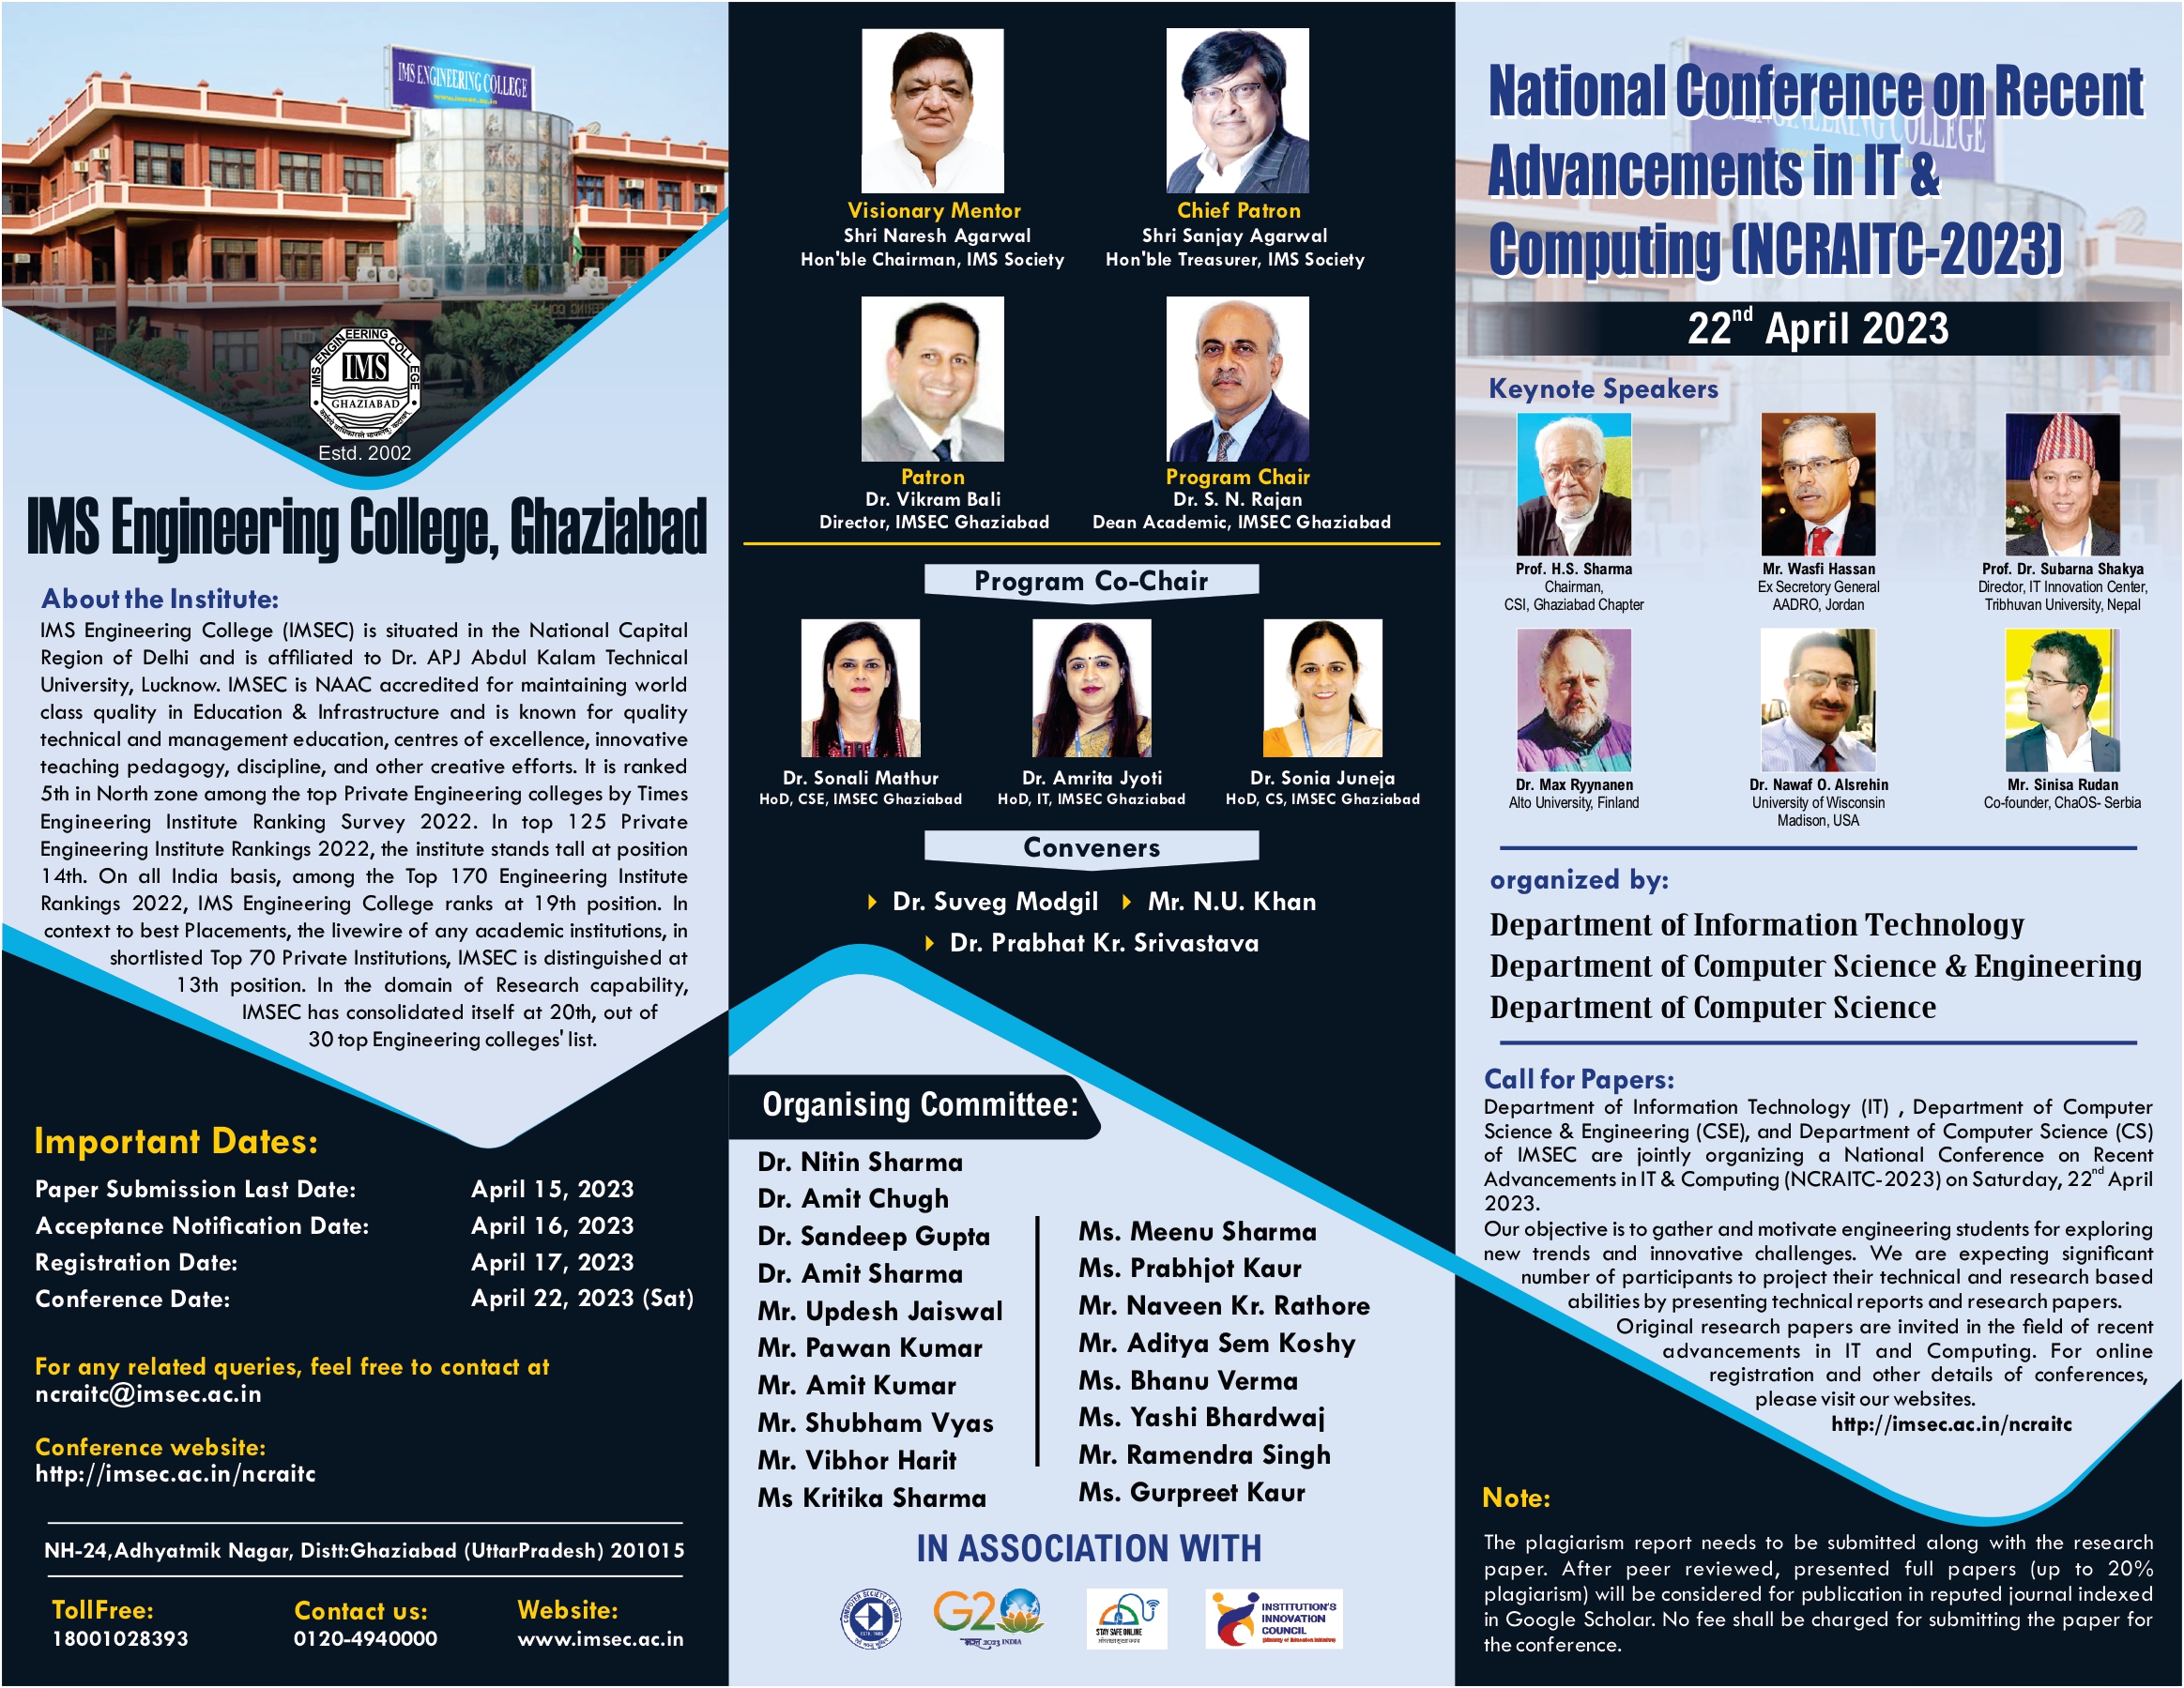 National Conference on Recent Advancement in IT & Computing